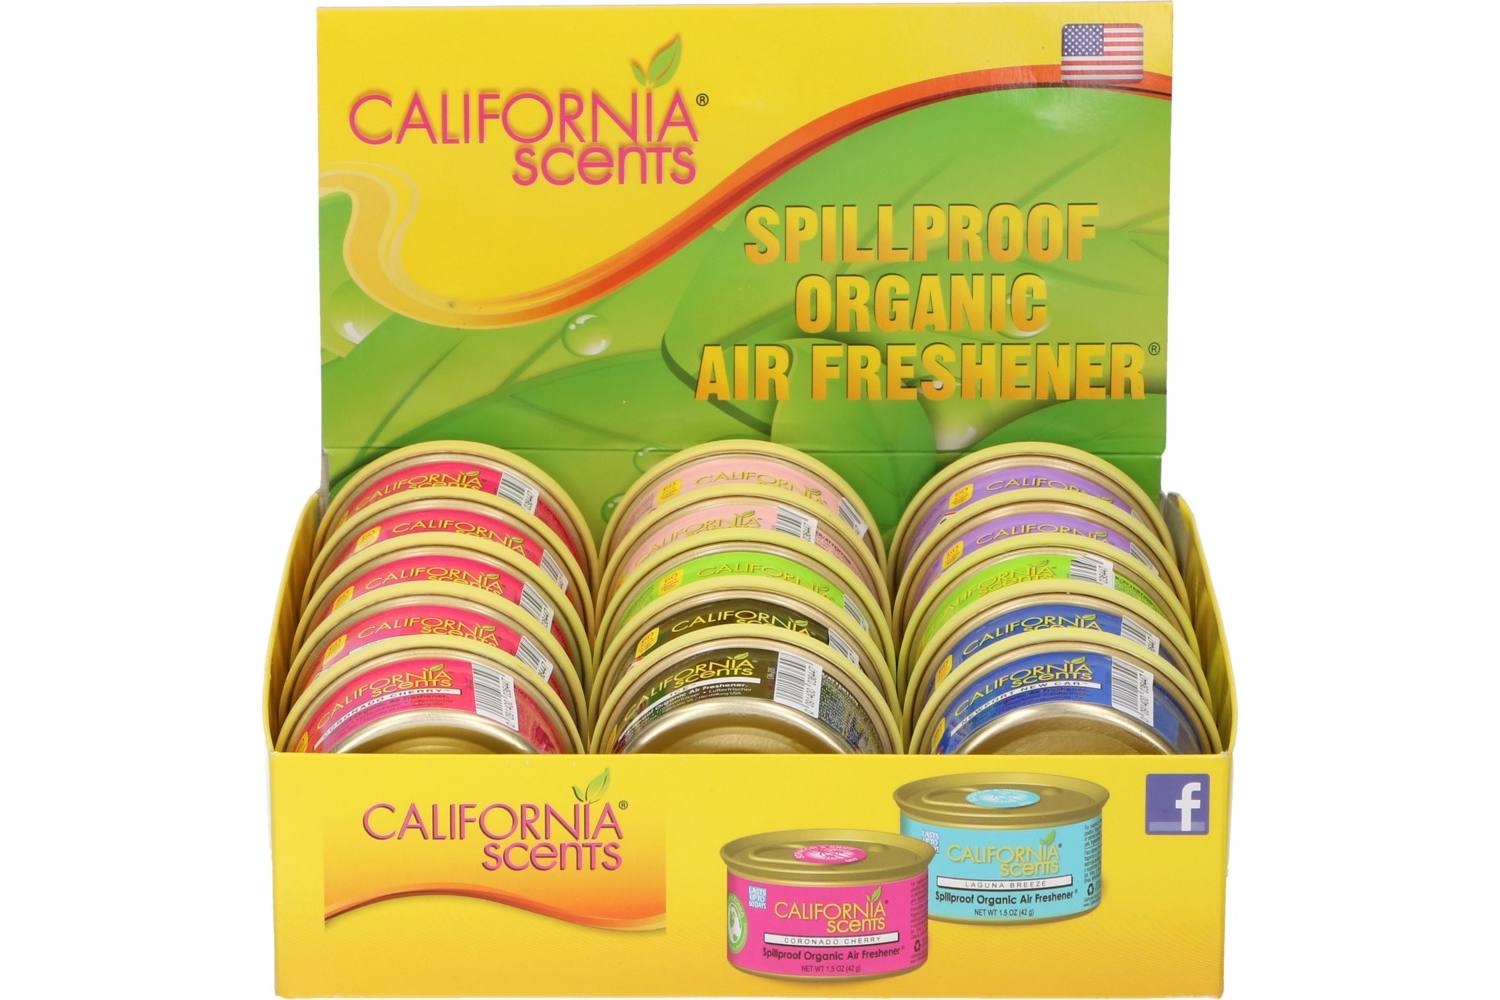 Display, California Scents, Air freshener, counter, 15 pieces, Air freshener 2